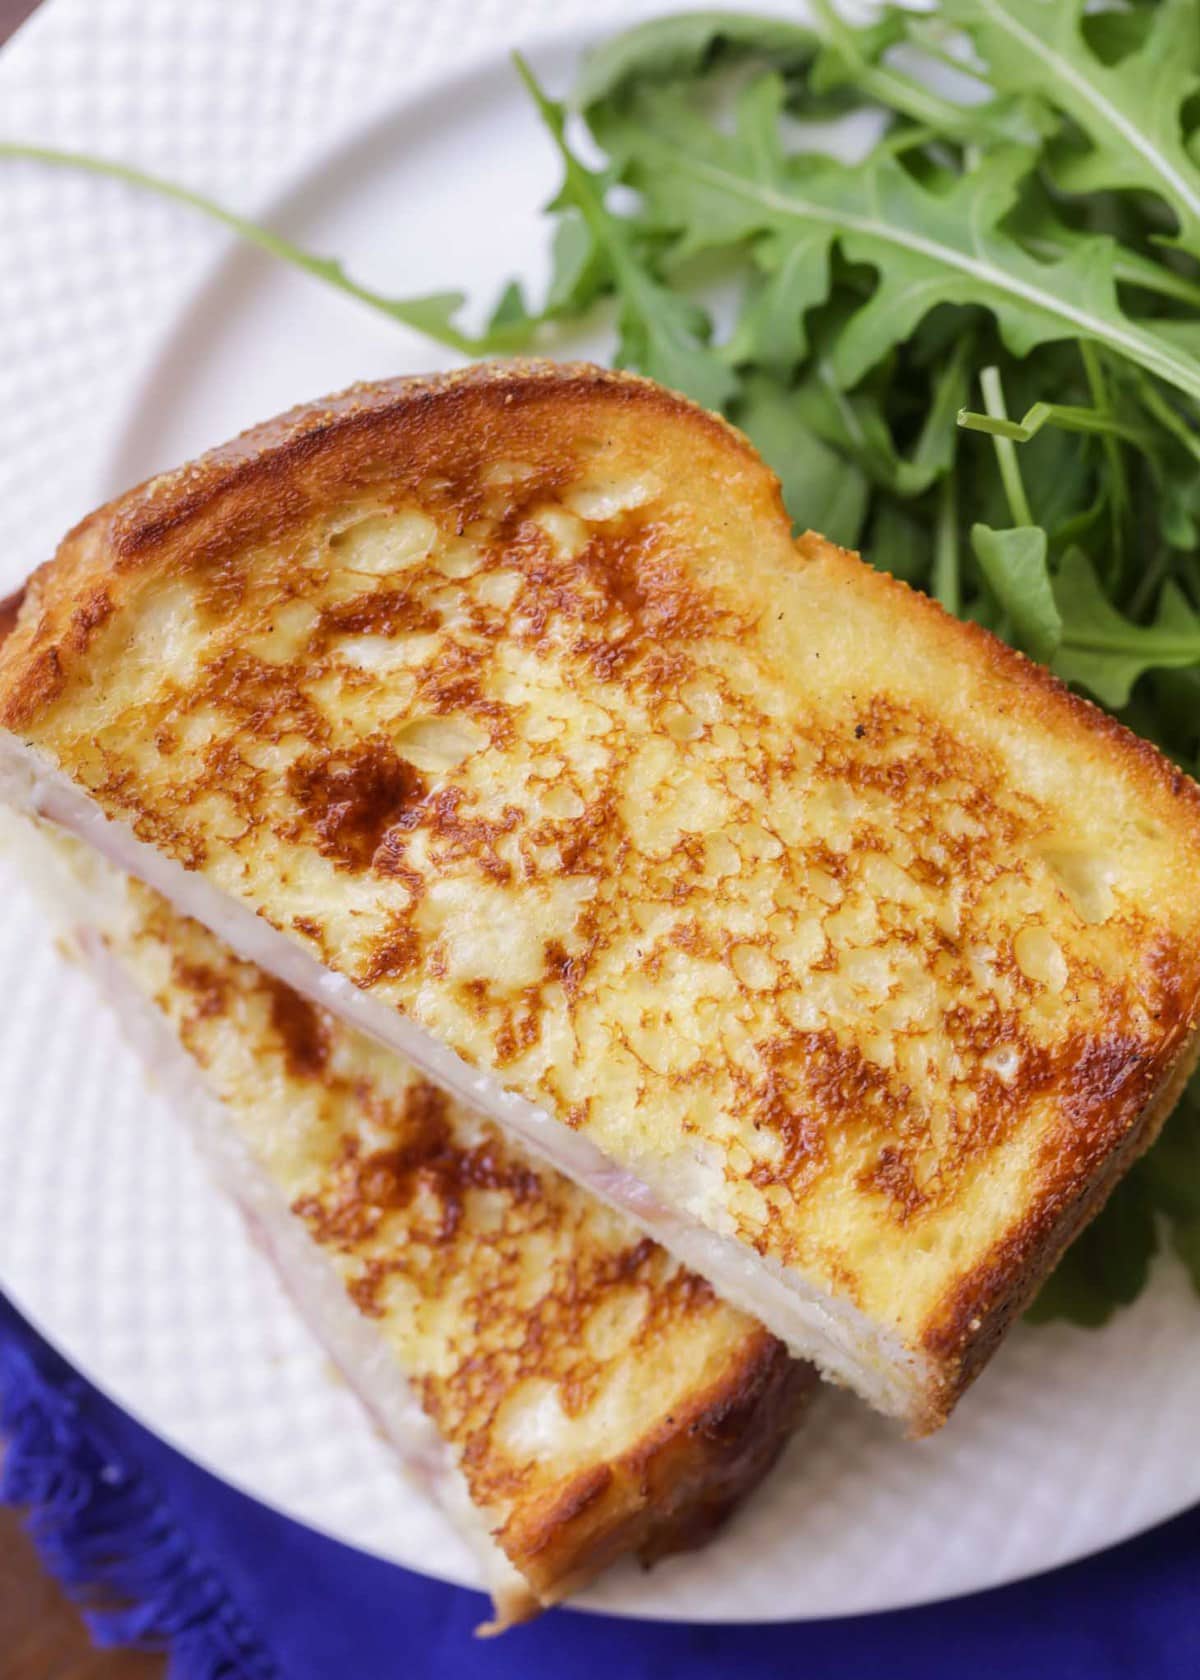 Easy Croque Monsieur recipe served with arugula on the side